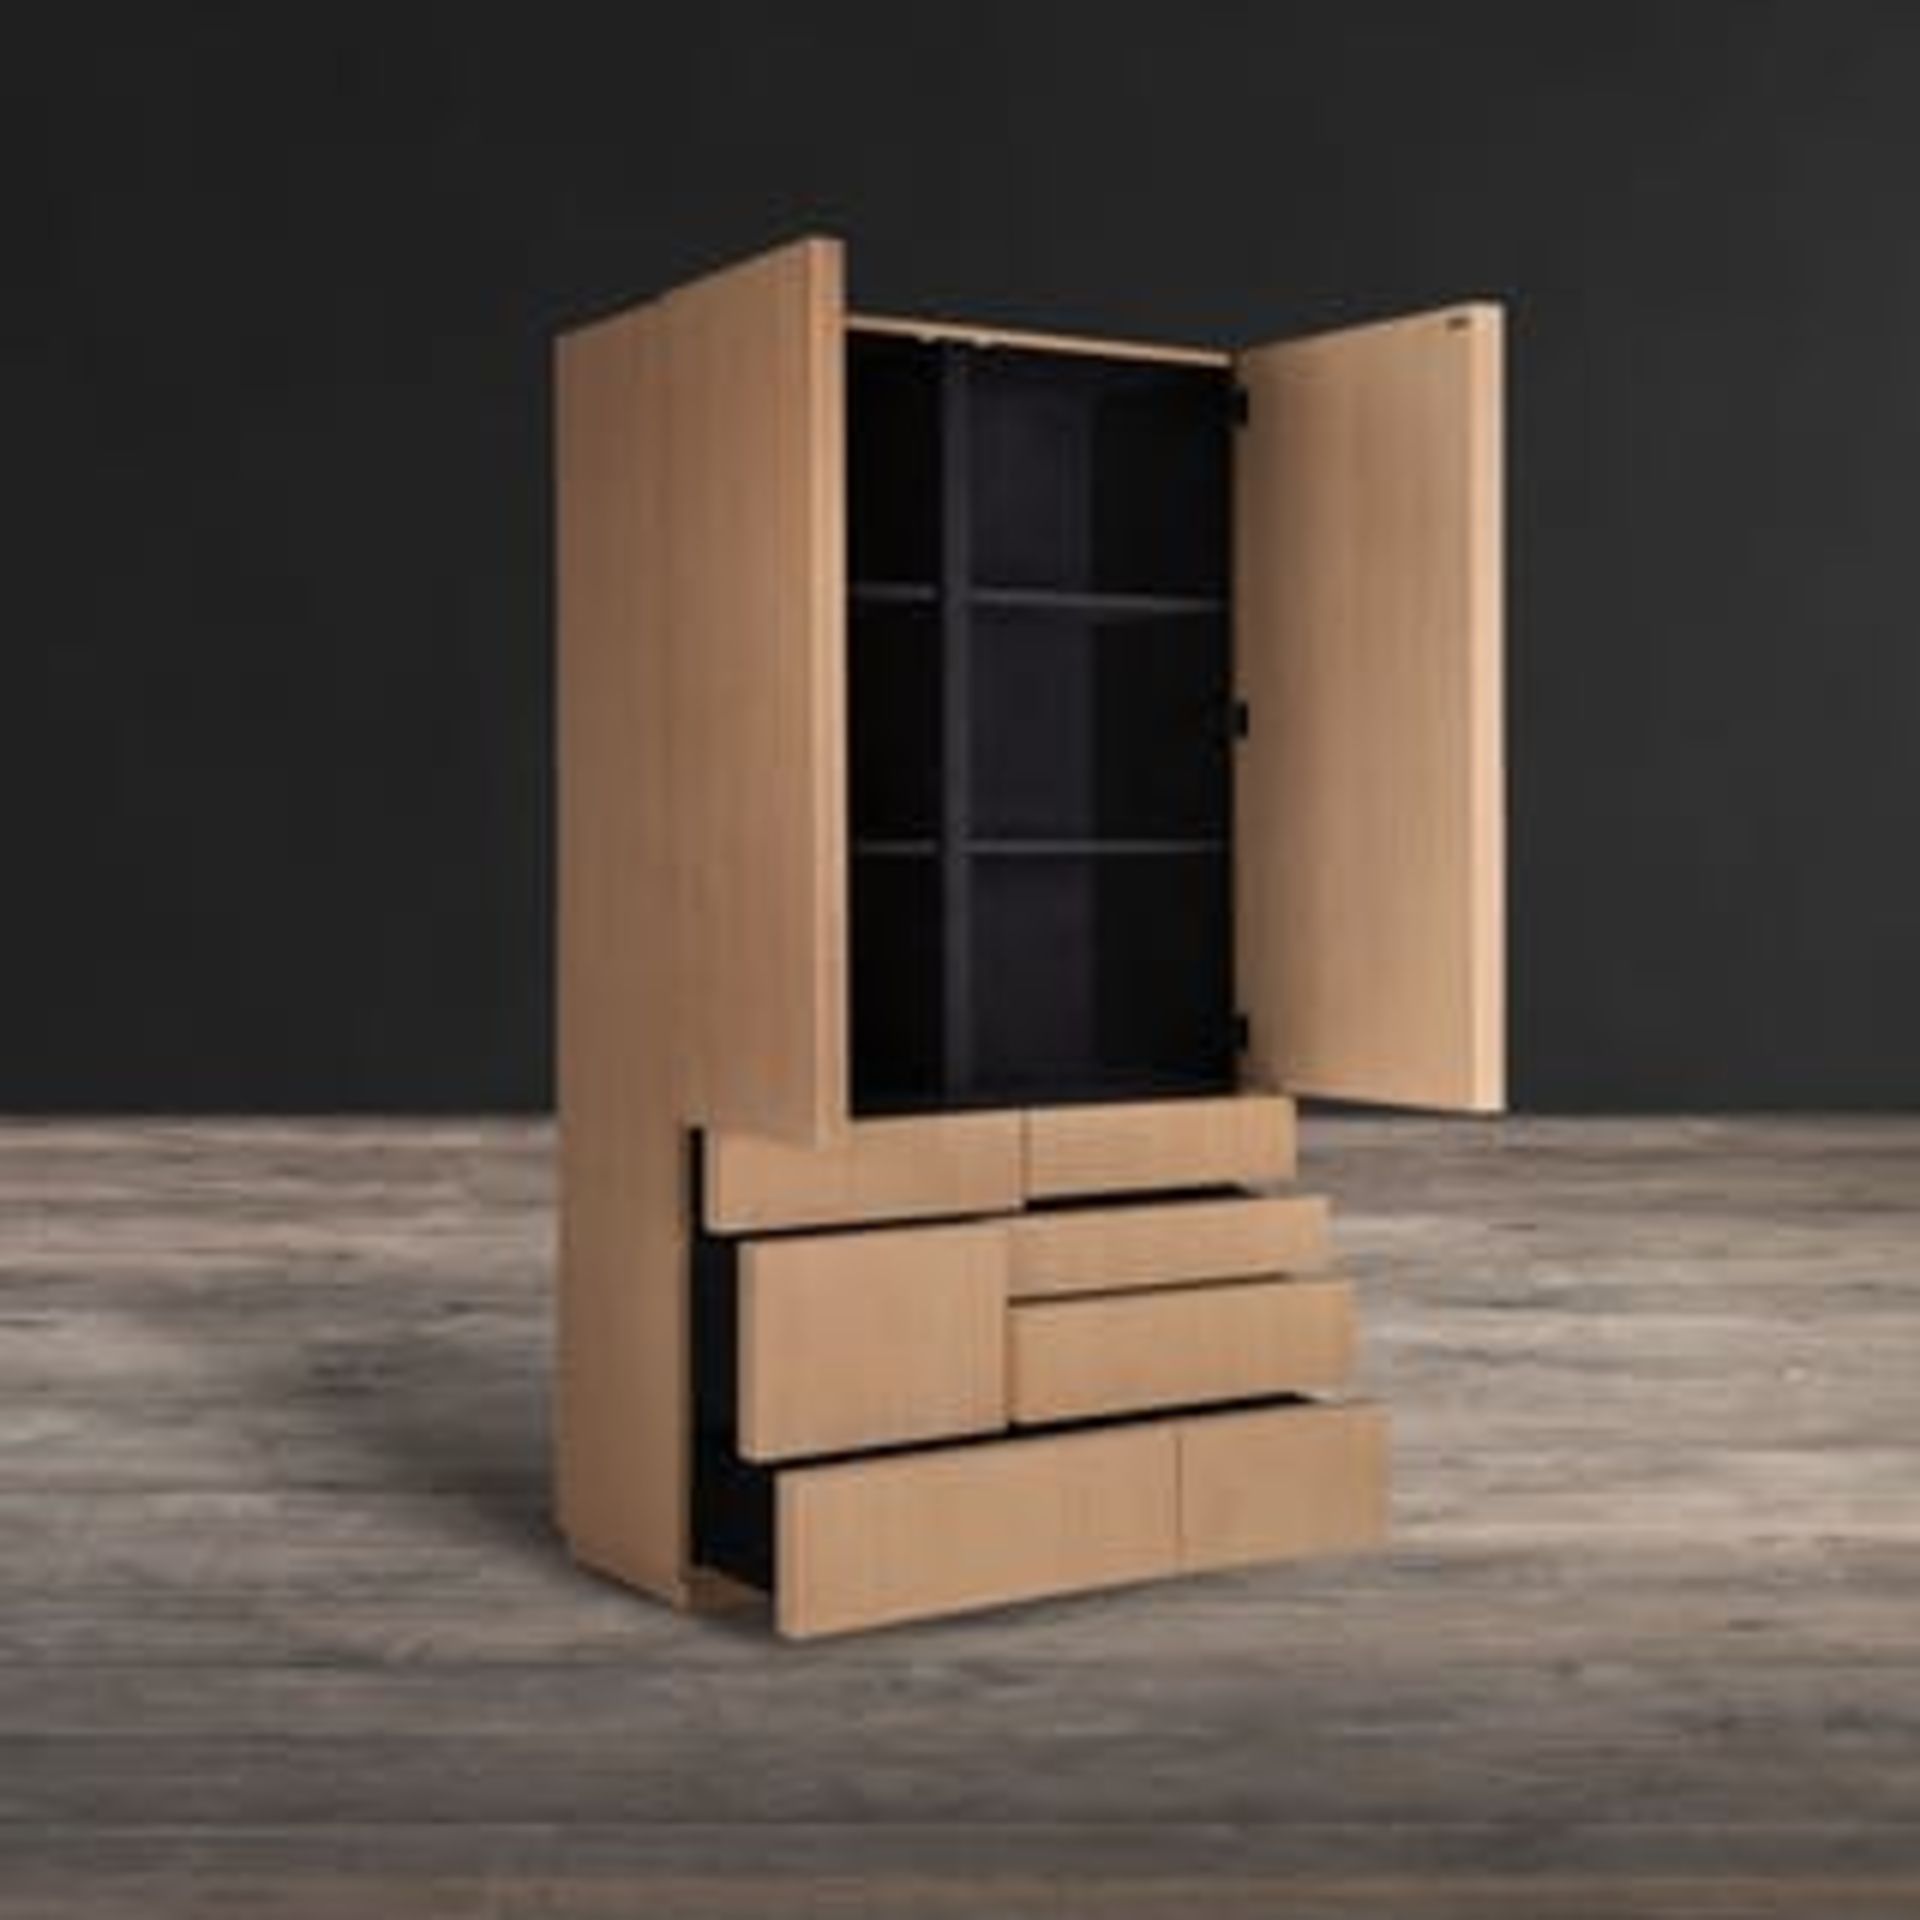 Island Cupboard -The Island cupboard champions a cool, lived in minimalism, designedWith an